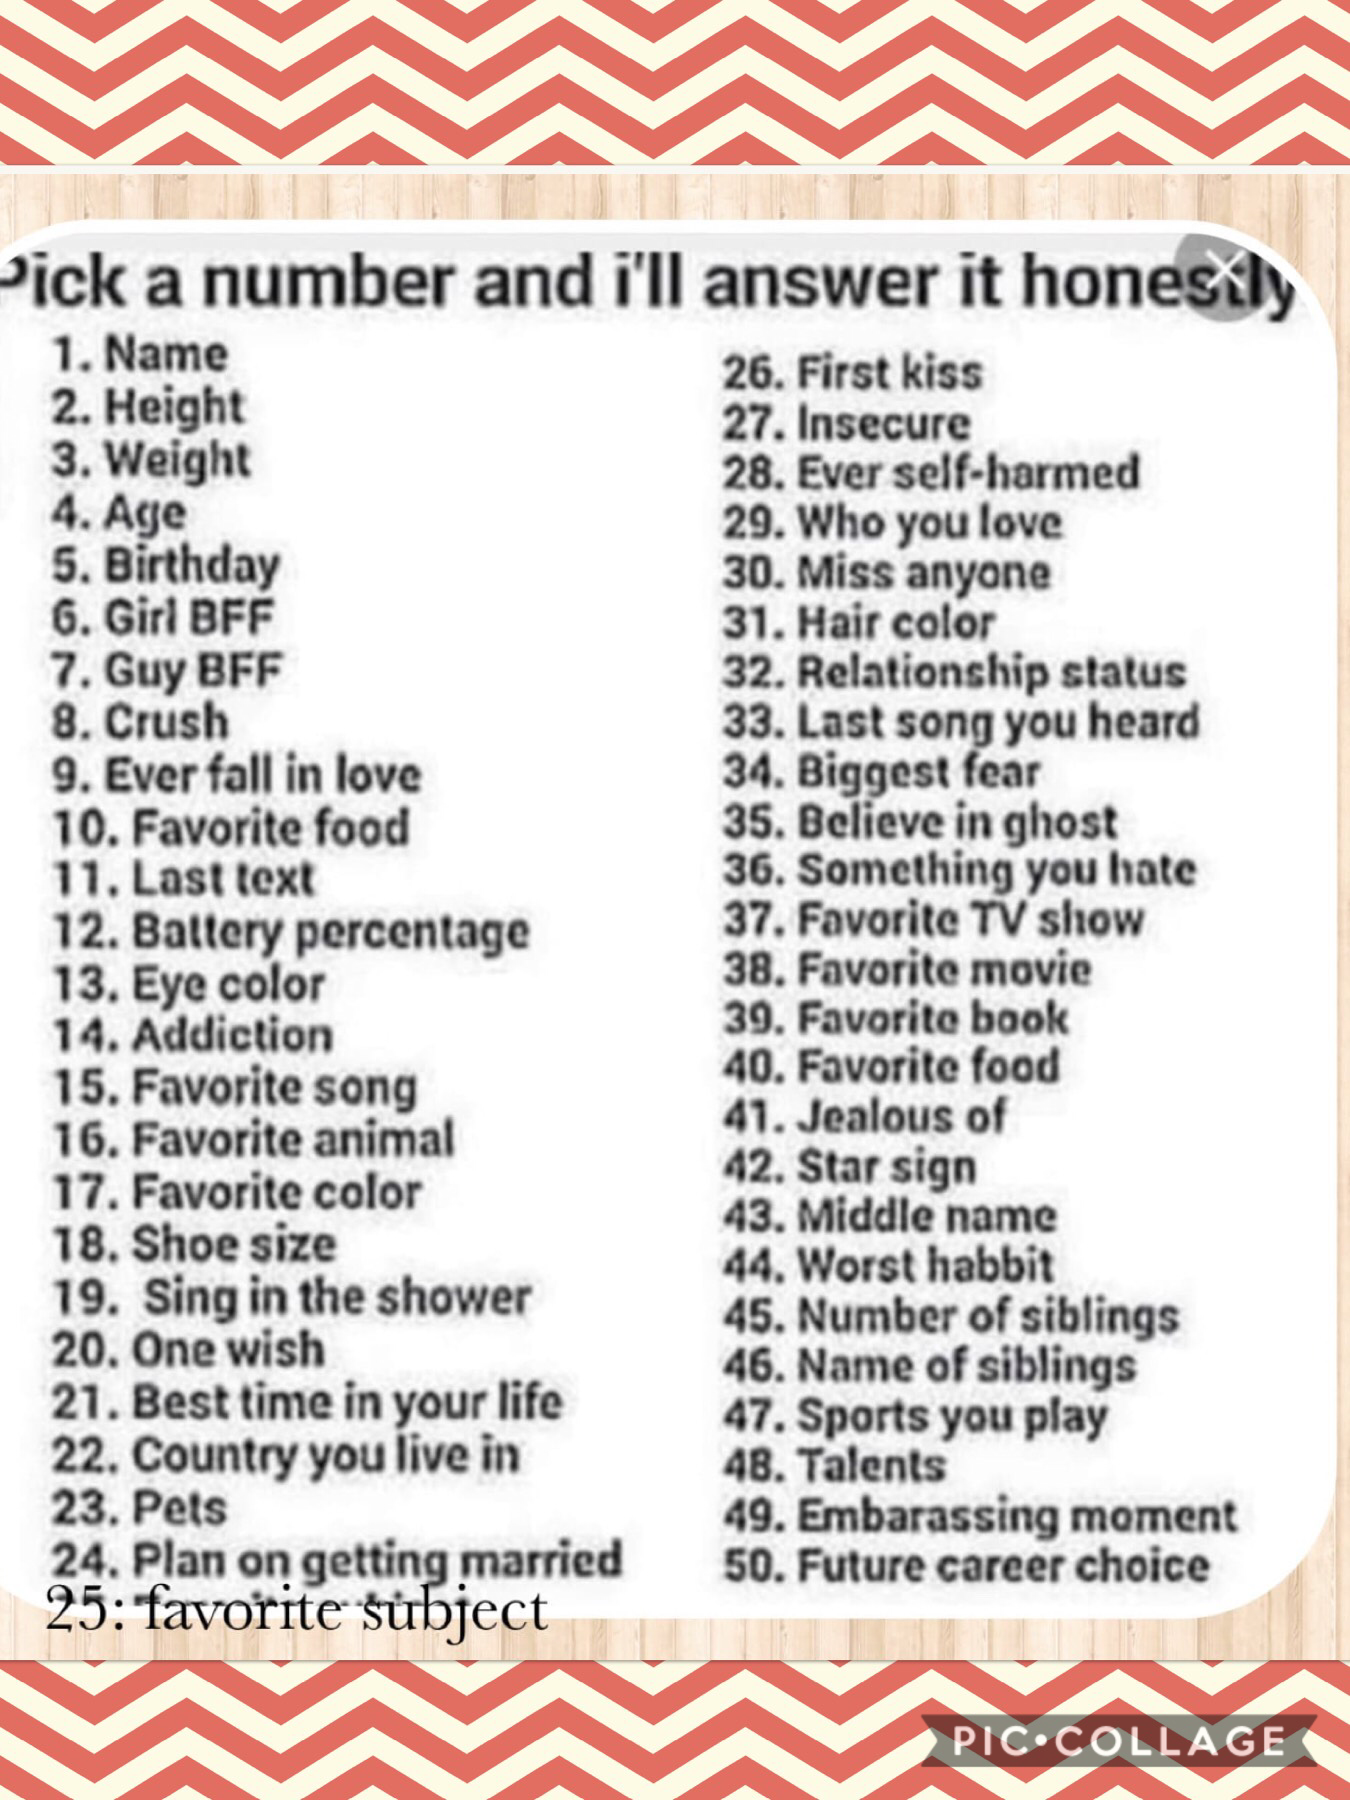 I will answer these honestly if you want to know!!!🙃😊😁😜